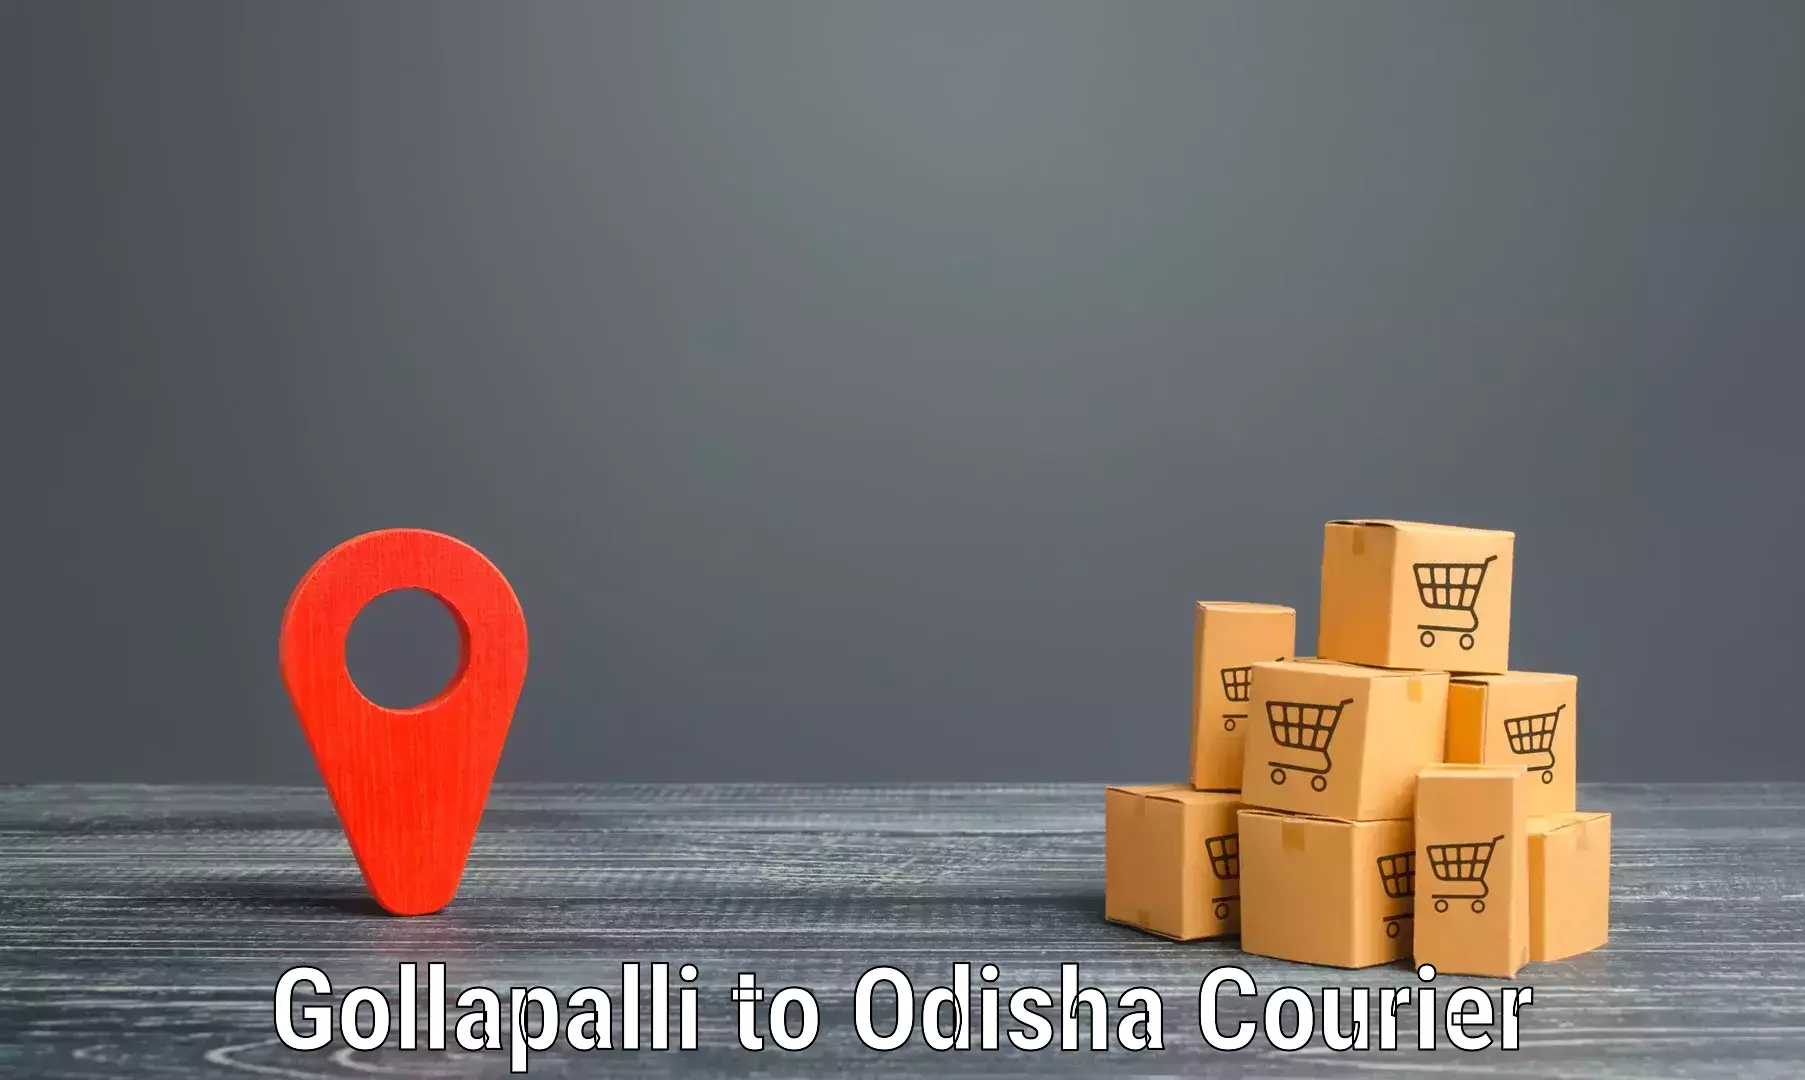 State-of-the-art courier technology Gollapalli to Jagannathprasad